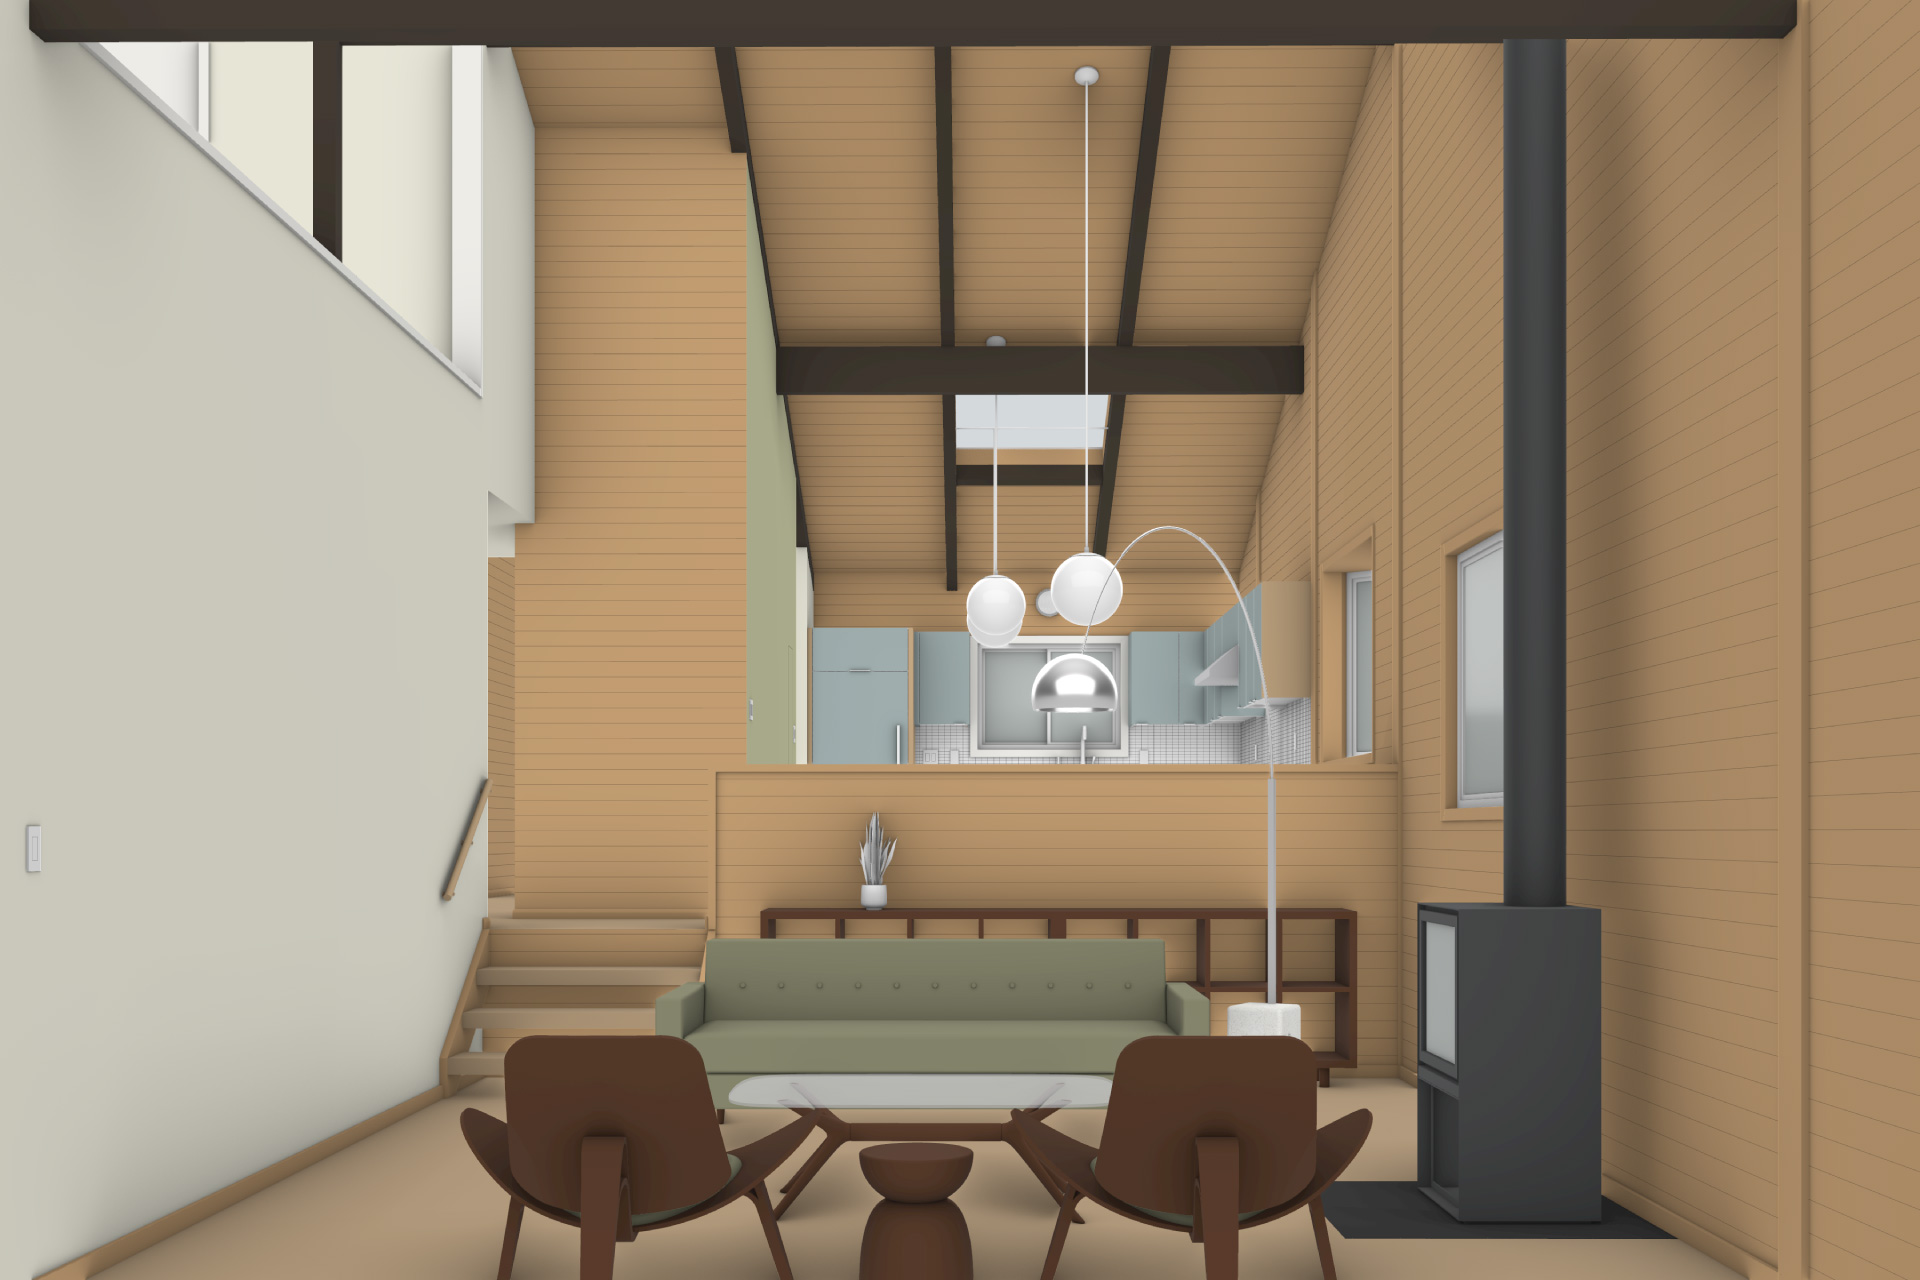 This is a view of the living room, dining room, and kitchen at Manzanita Beach House.